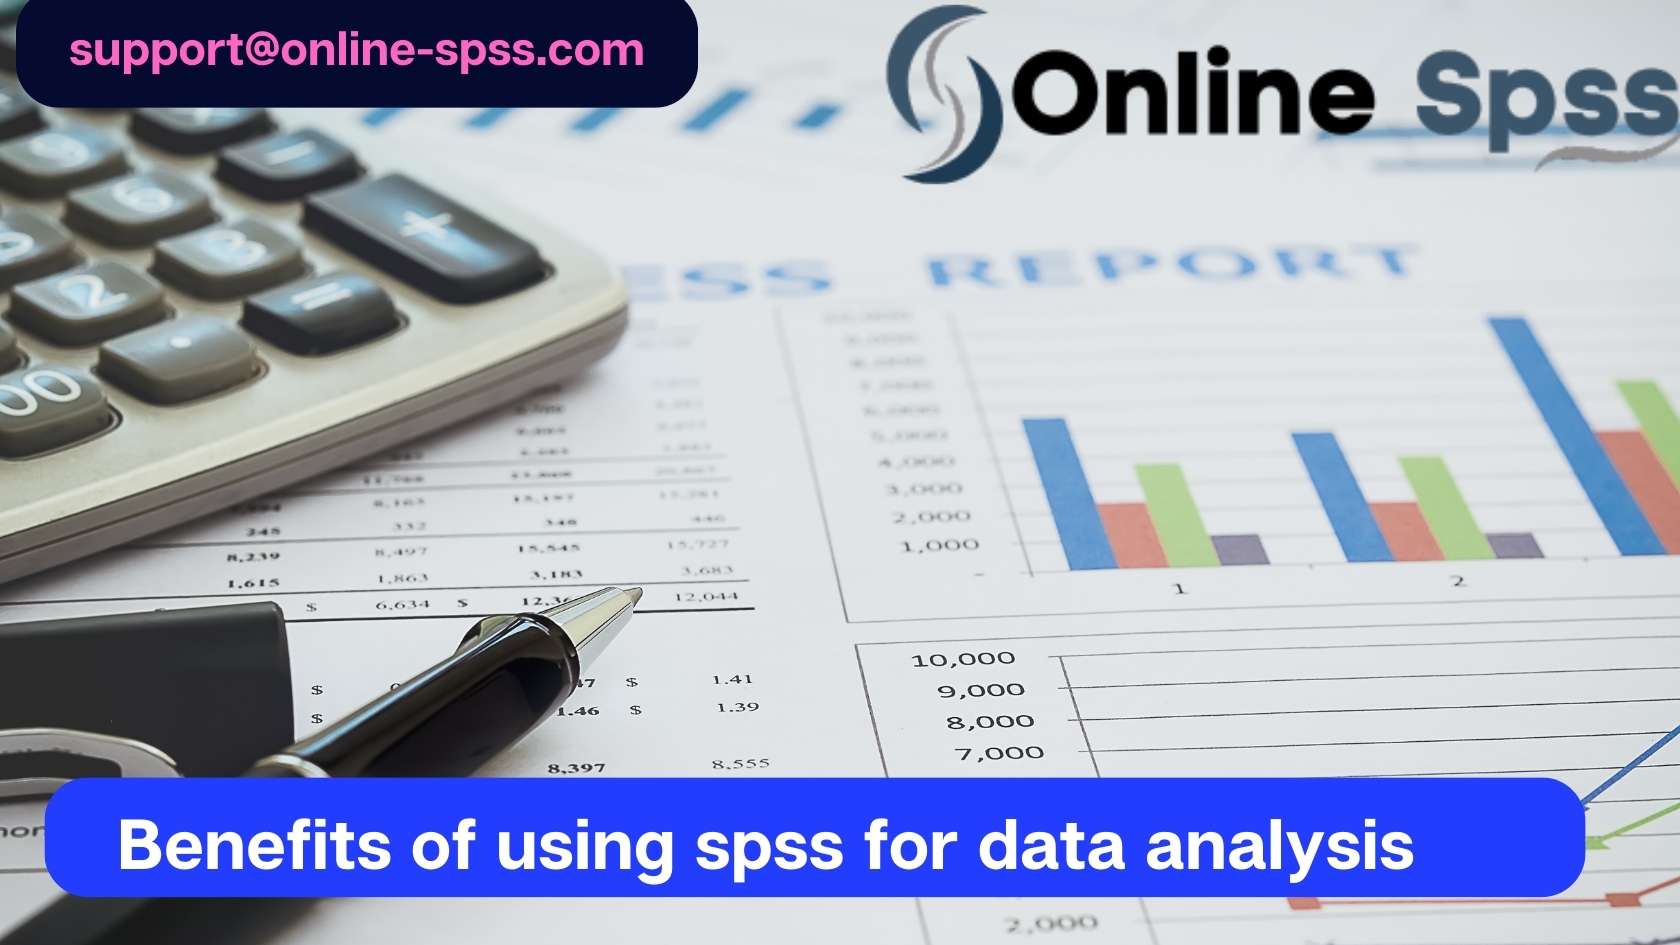 Benefits of using spss for data analysis